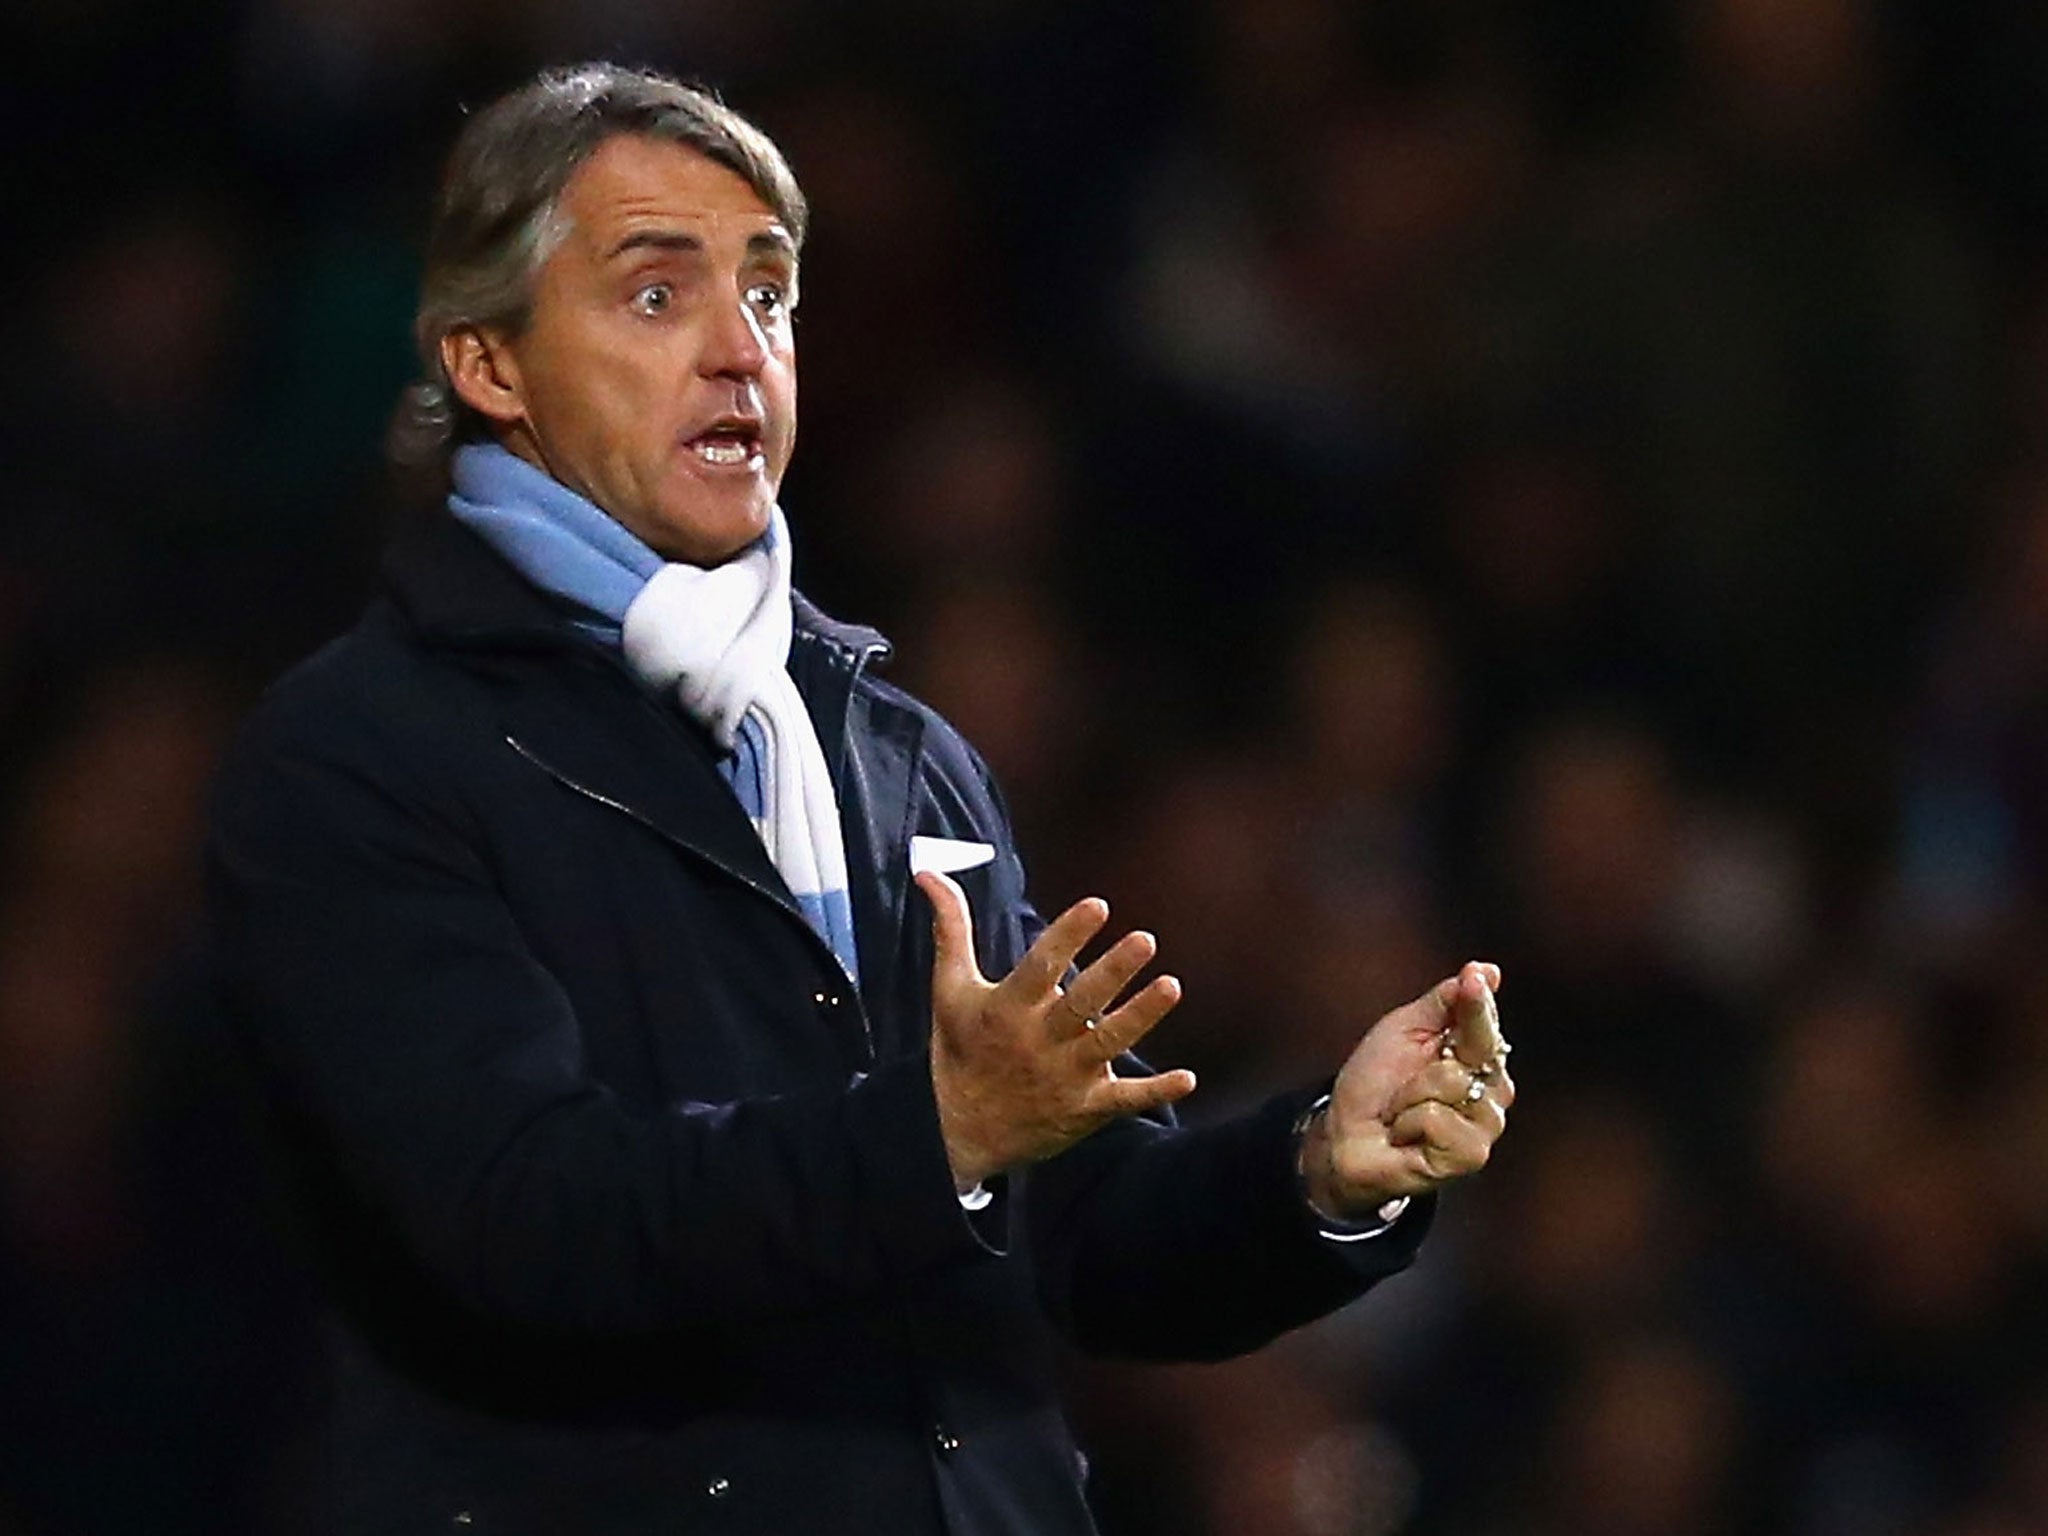 Roberto Mancini: 'At Inter, I won seven trophies in four years and they still sacked me'